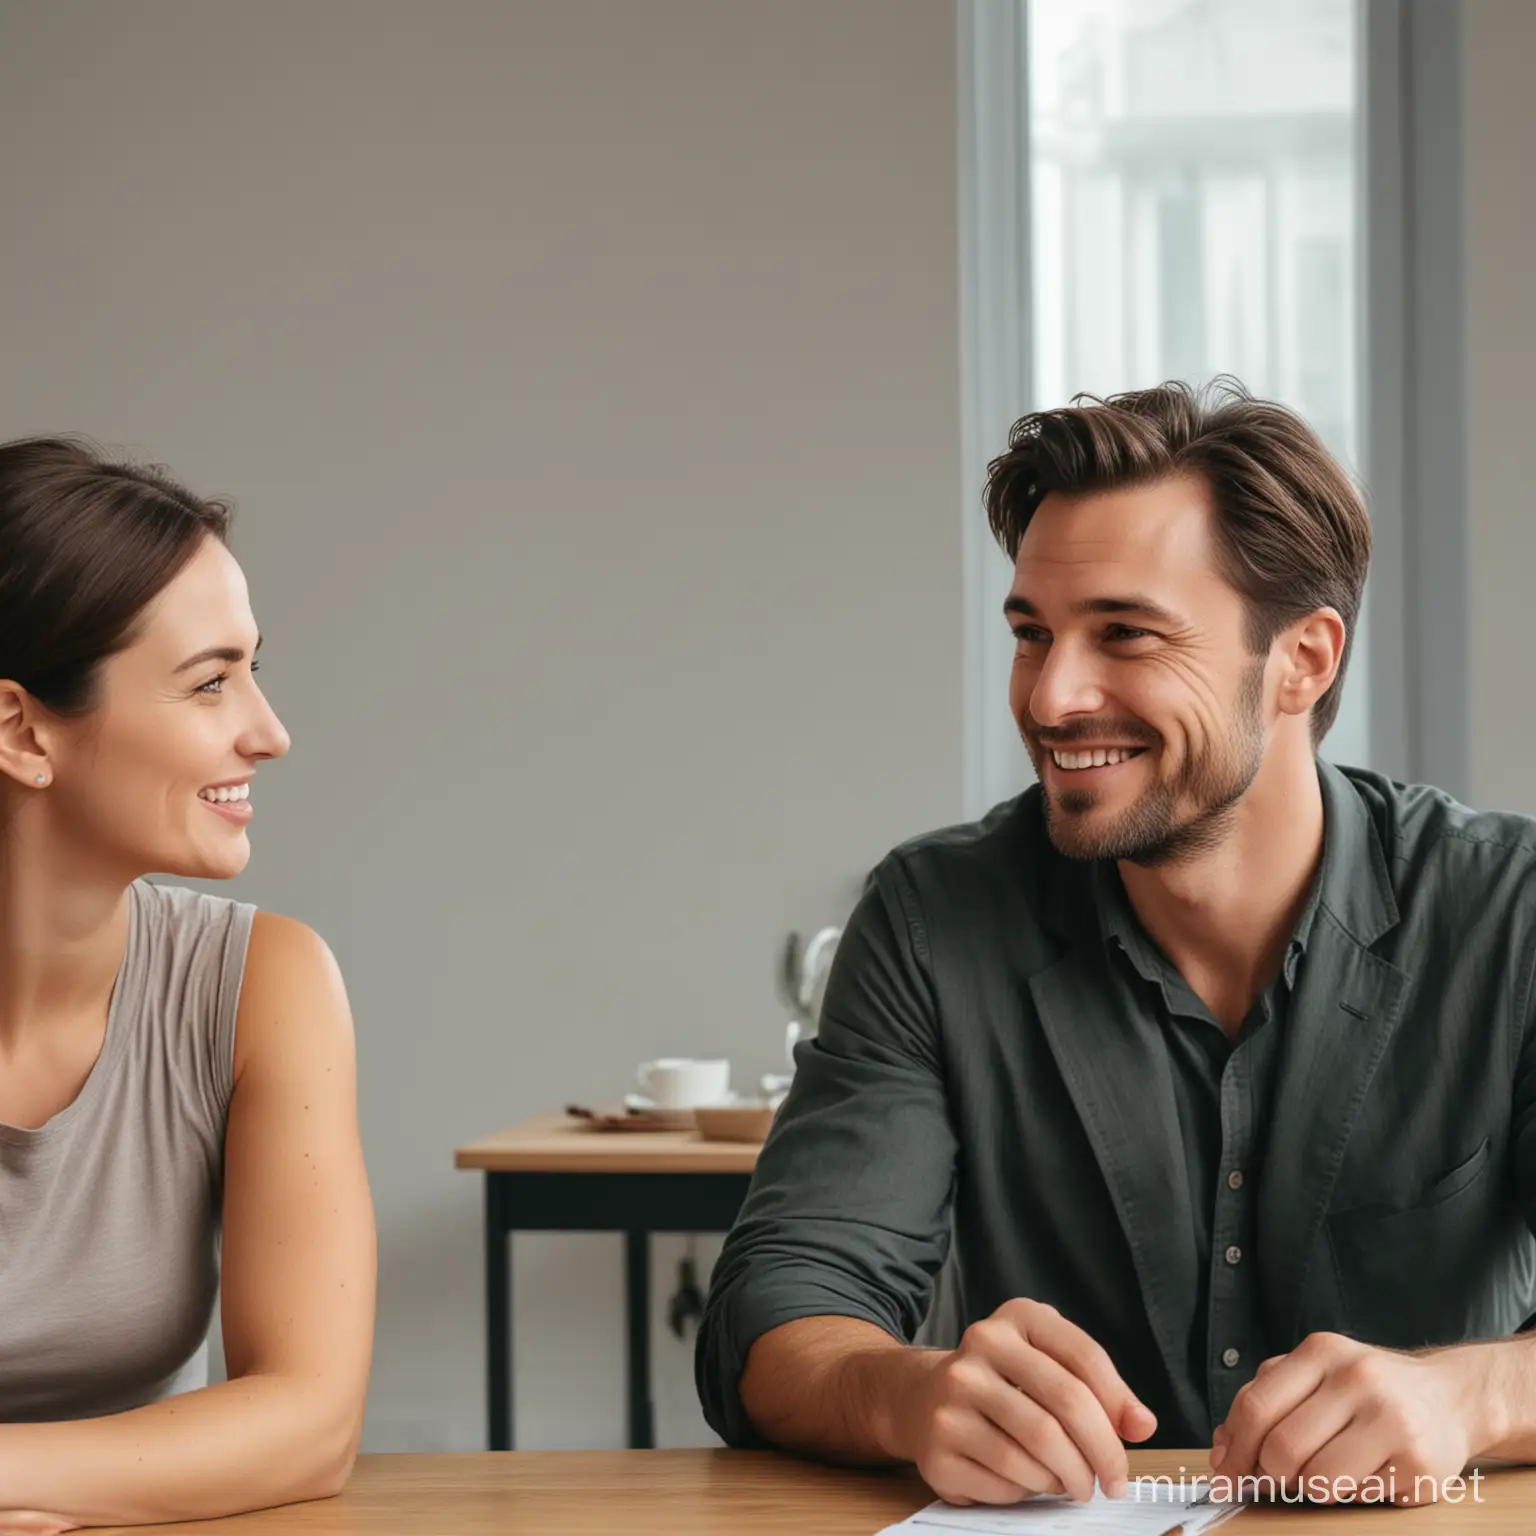 Serious Man and Smiling Woman Engaged in Conversation at Table